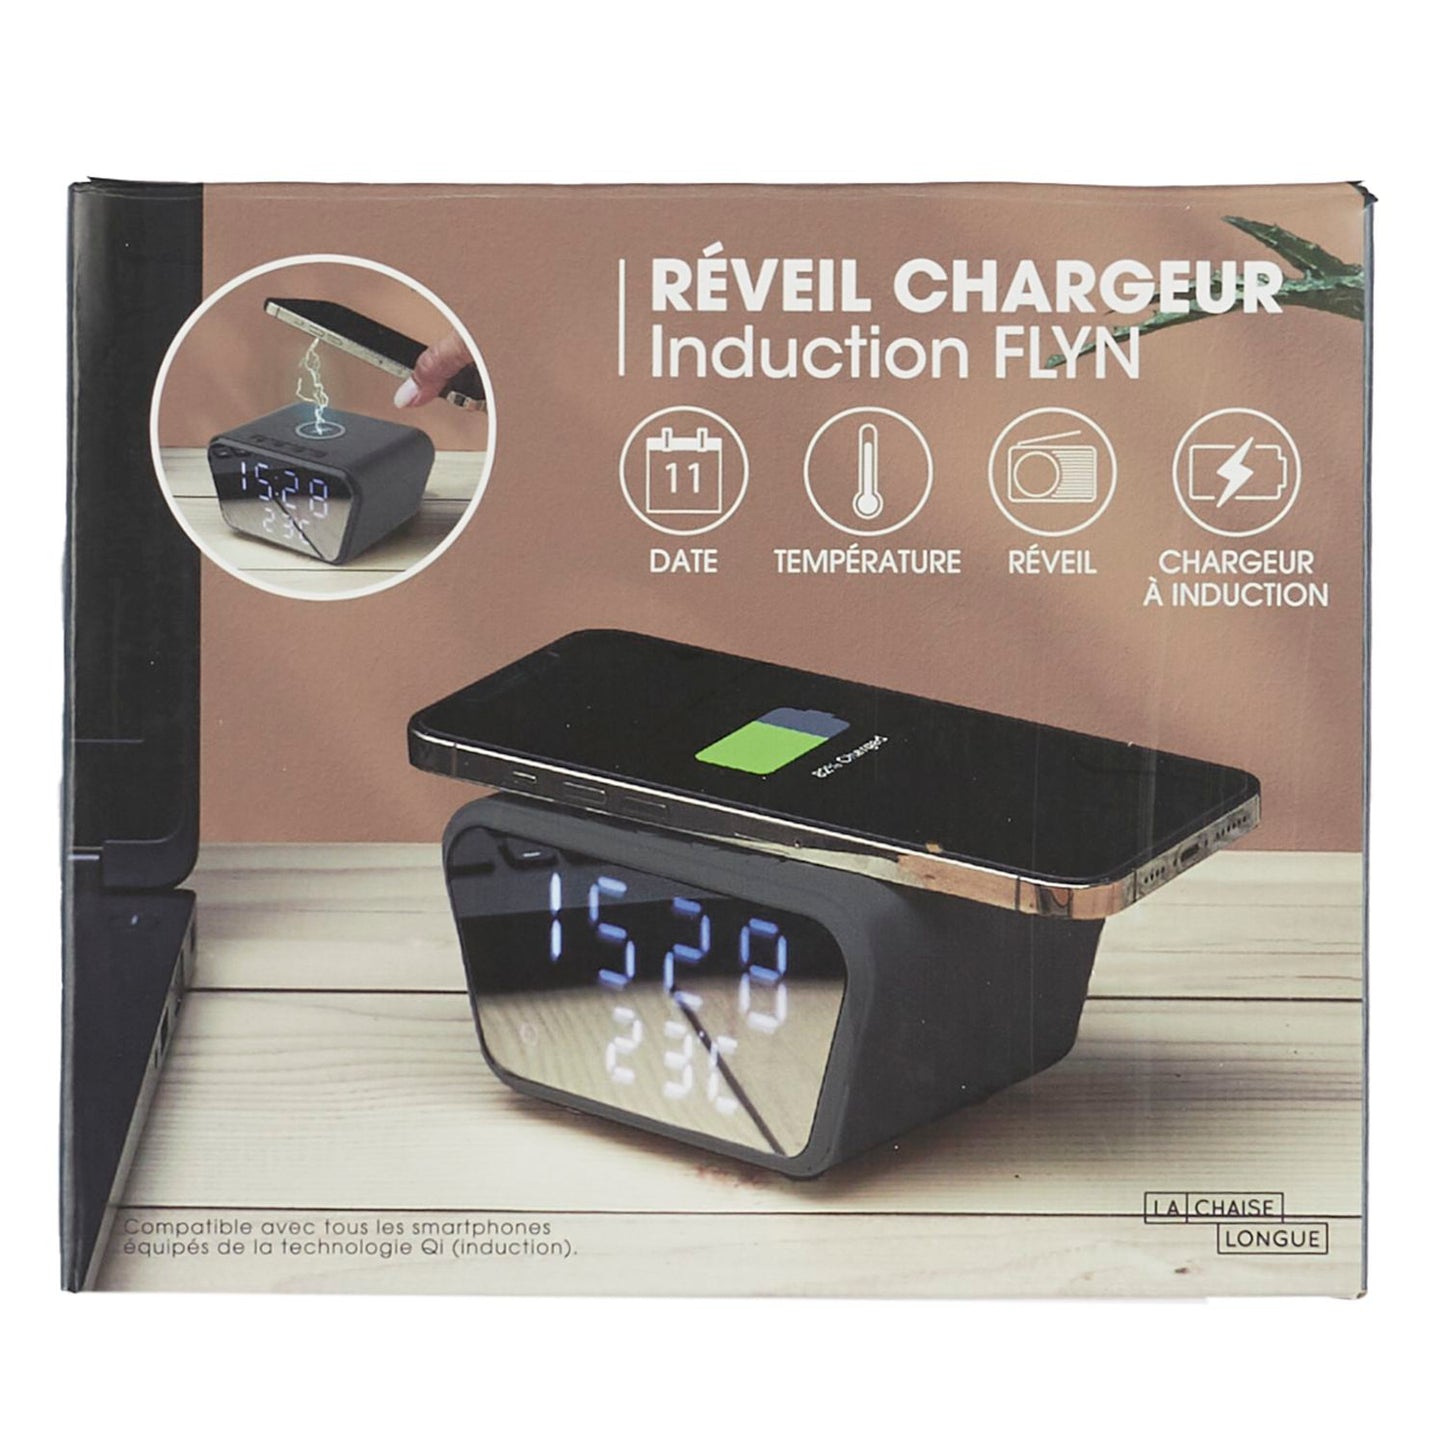 REVEIL CHARGEUR INDUCTION FLYN